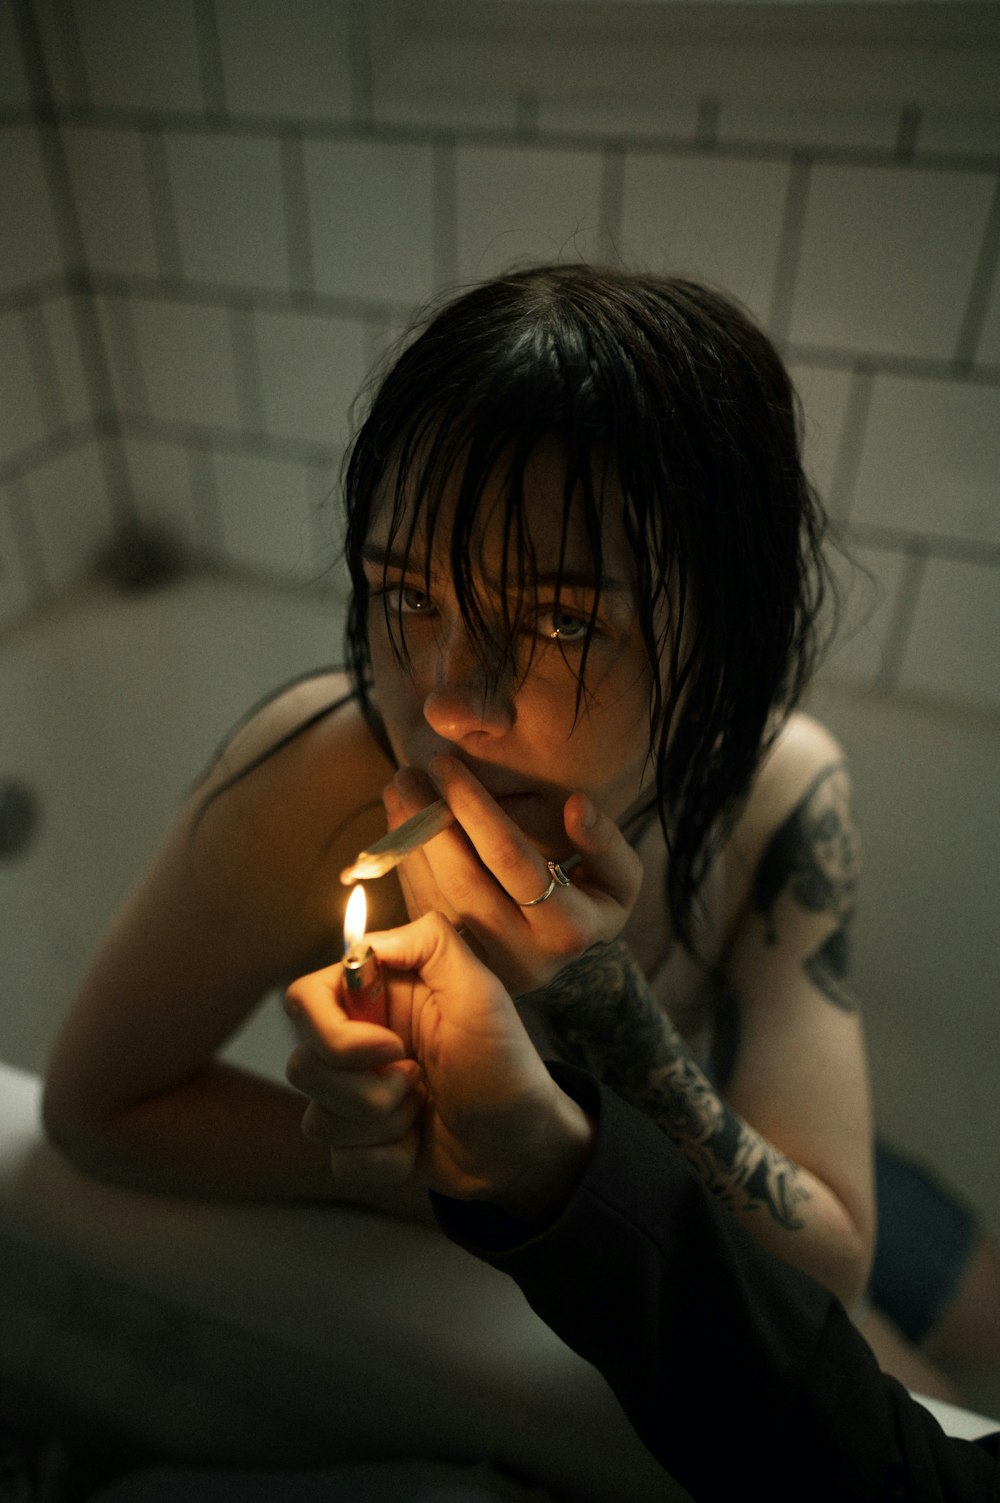 a woman sitting in a bathtub holding a lit candle